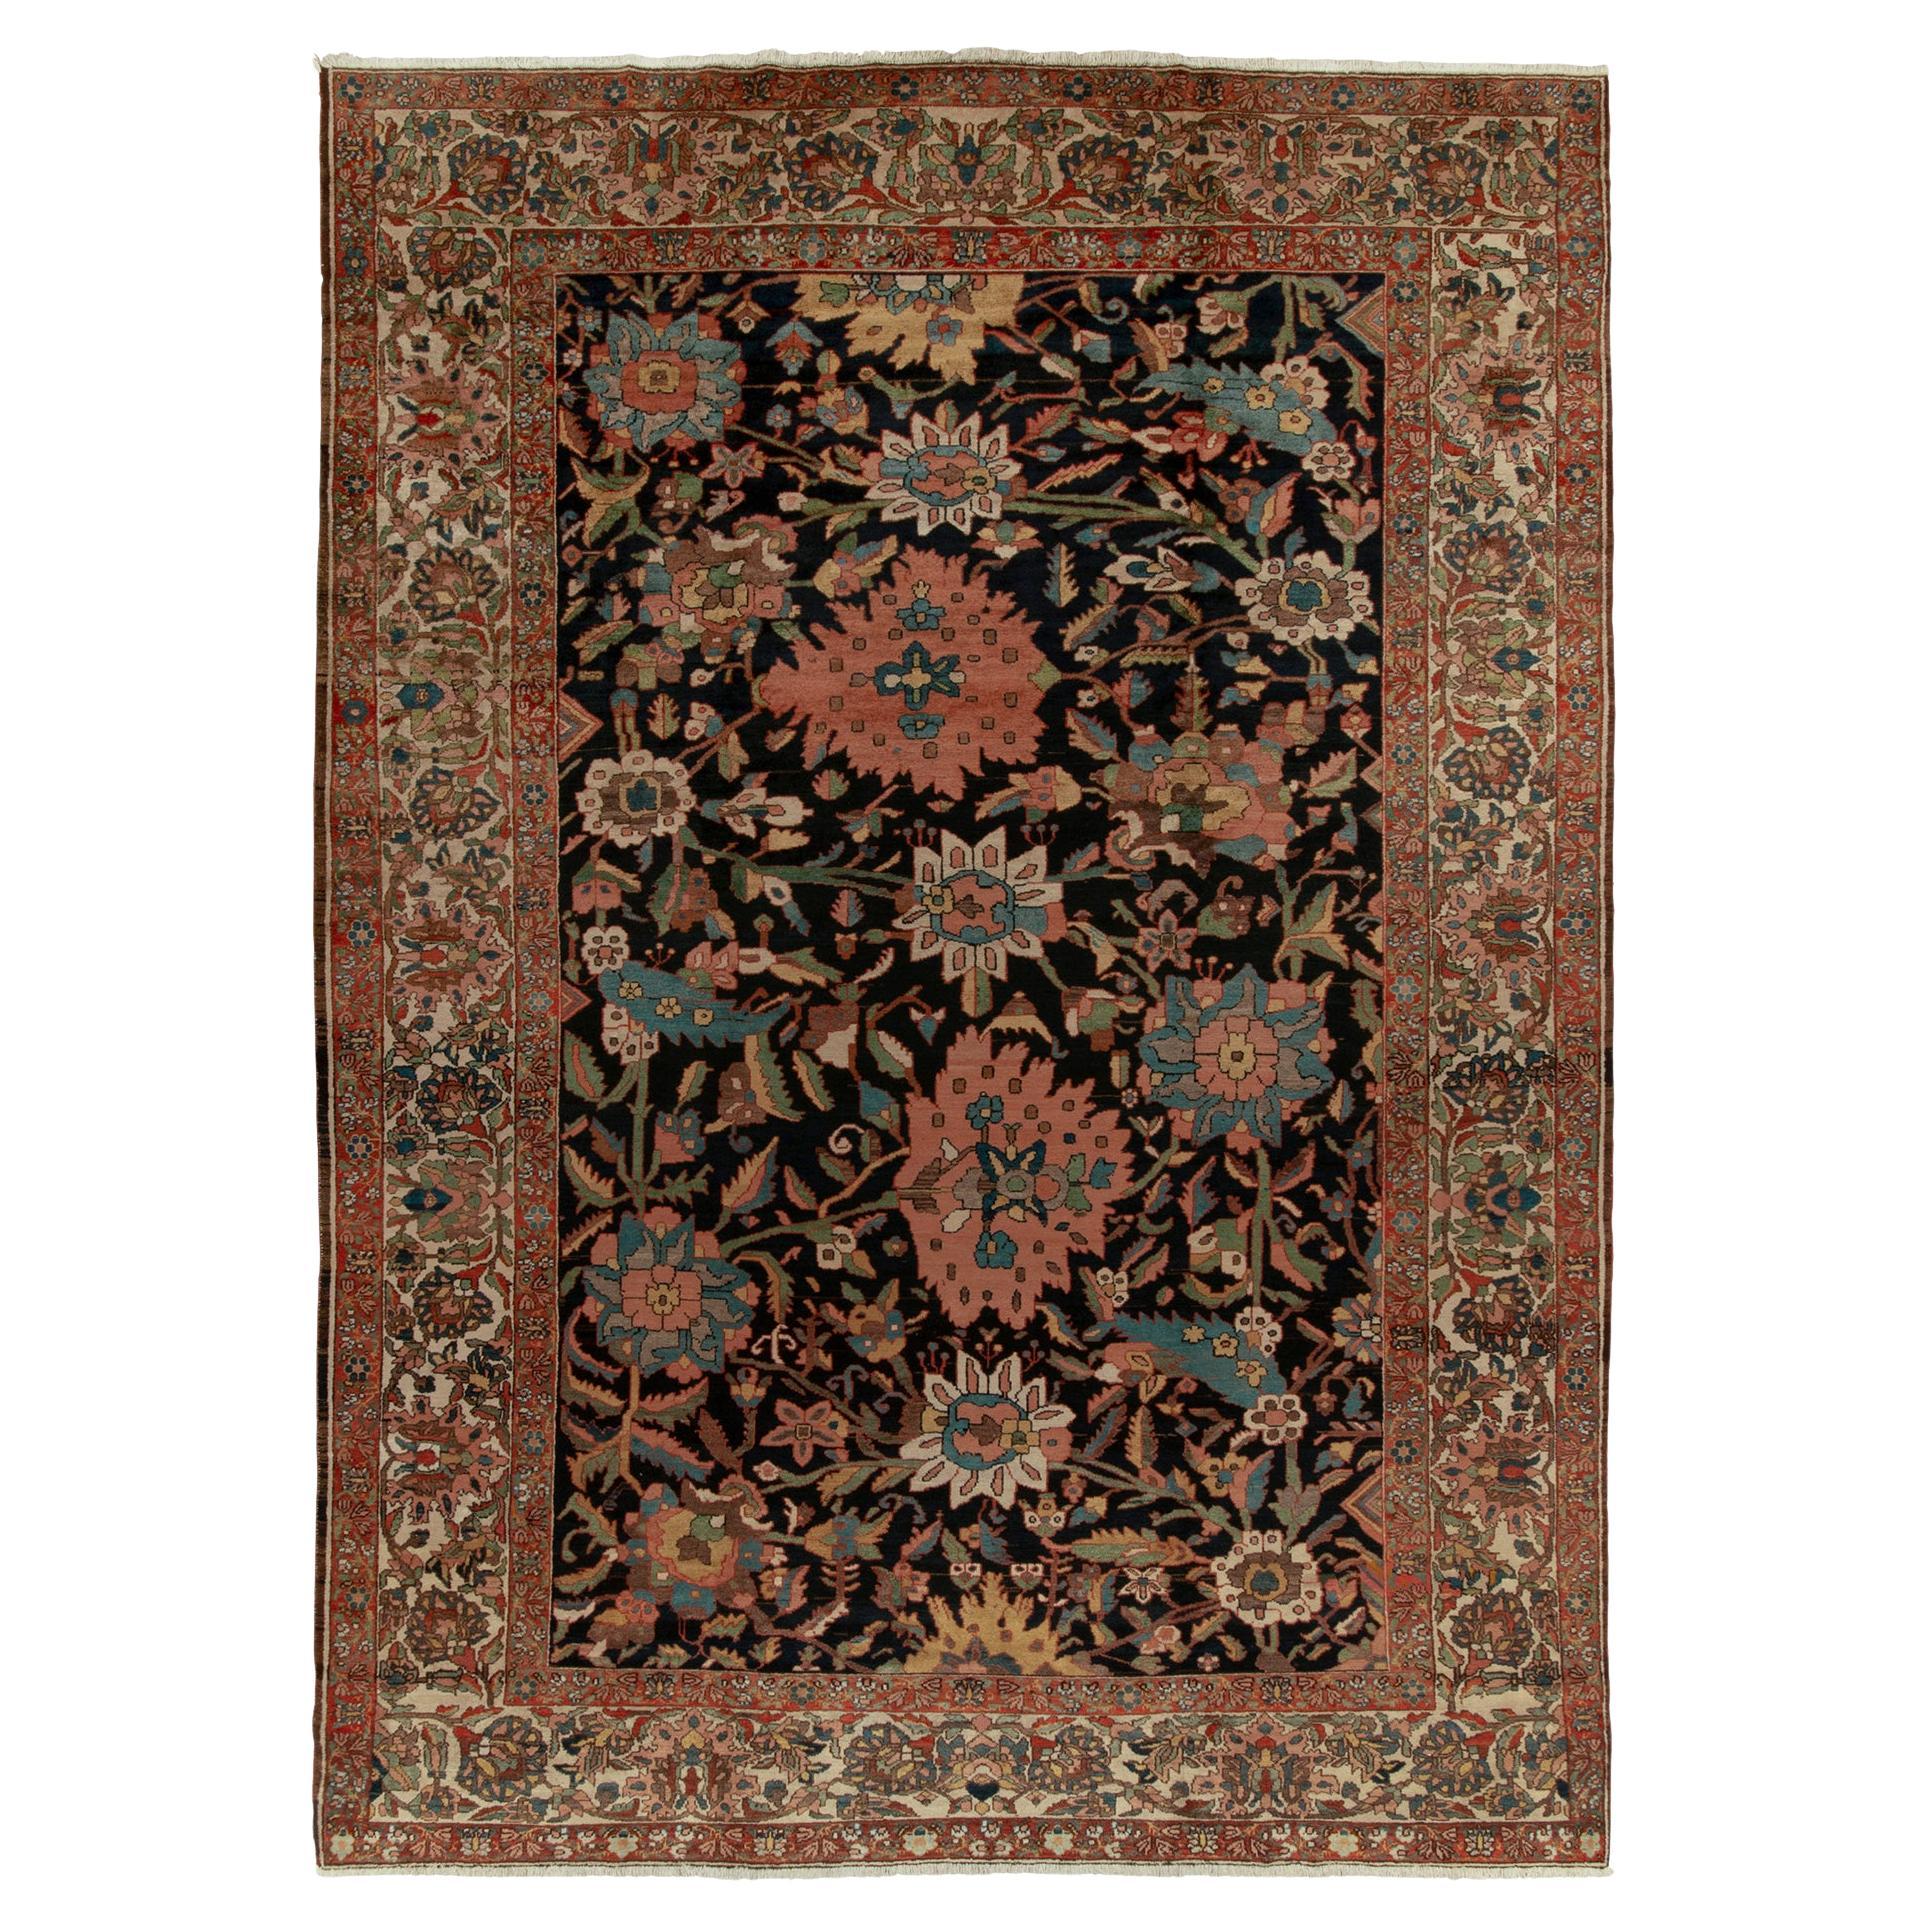 Rare Antique Persian Bakhtiari Rug in Red, Black Floral Patterns by Rug & Kilim For Sale